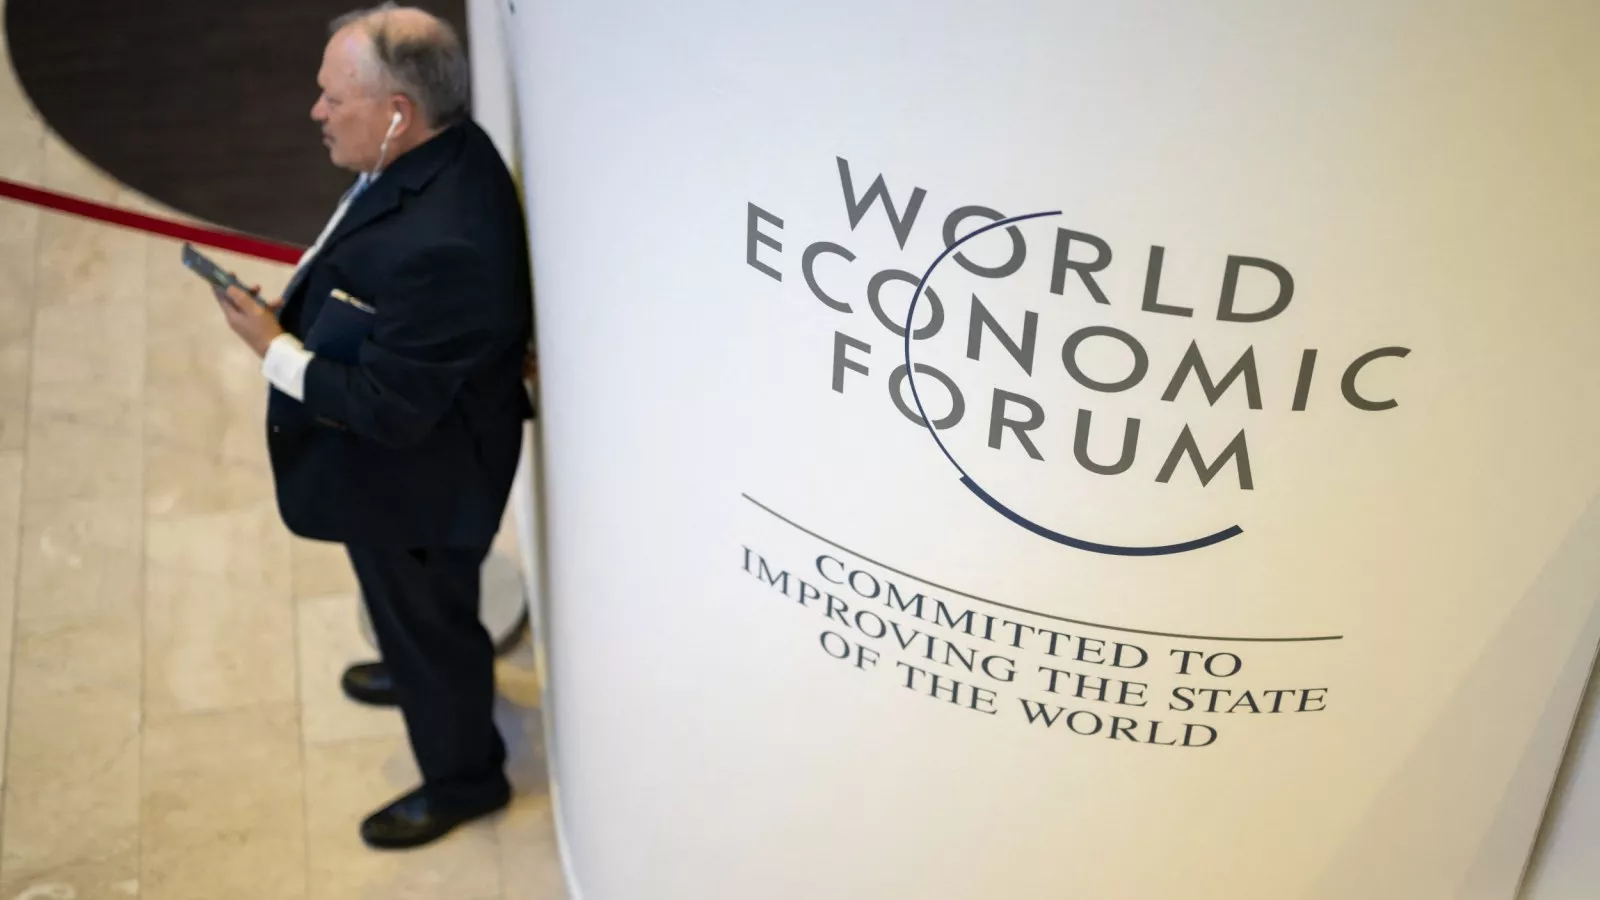 The Davos Elites Have a Problem With Women | Opinion